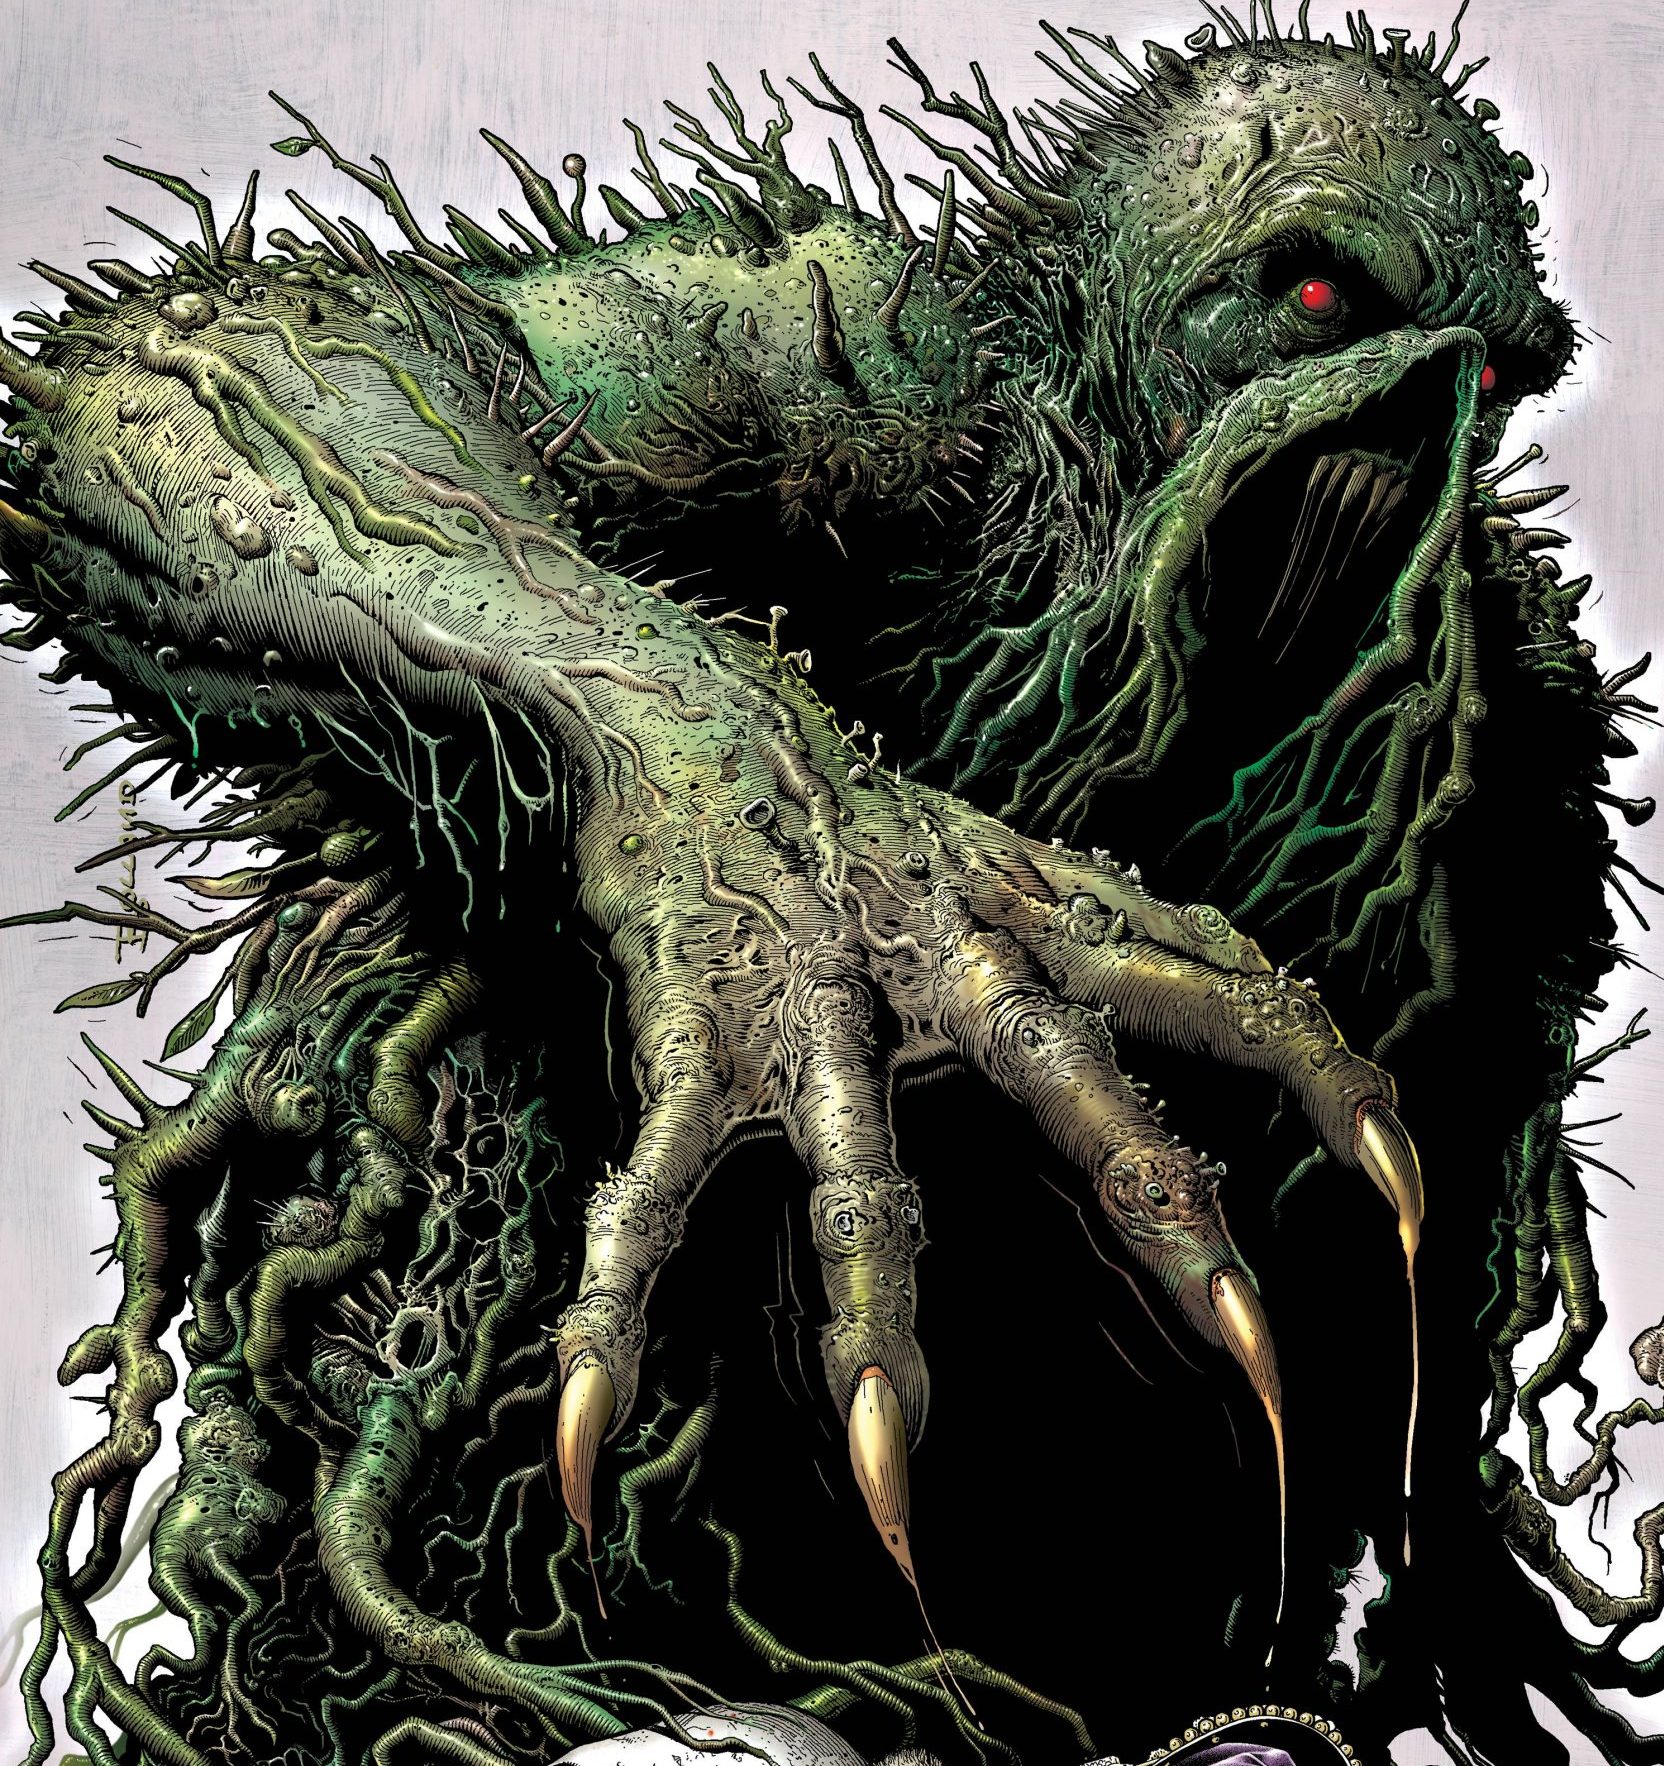 'The Swamp Thing' #5 review: War never changes